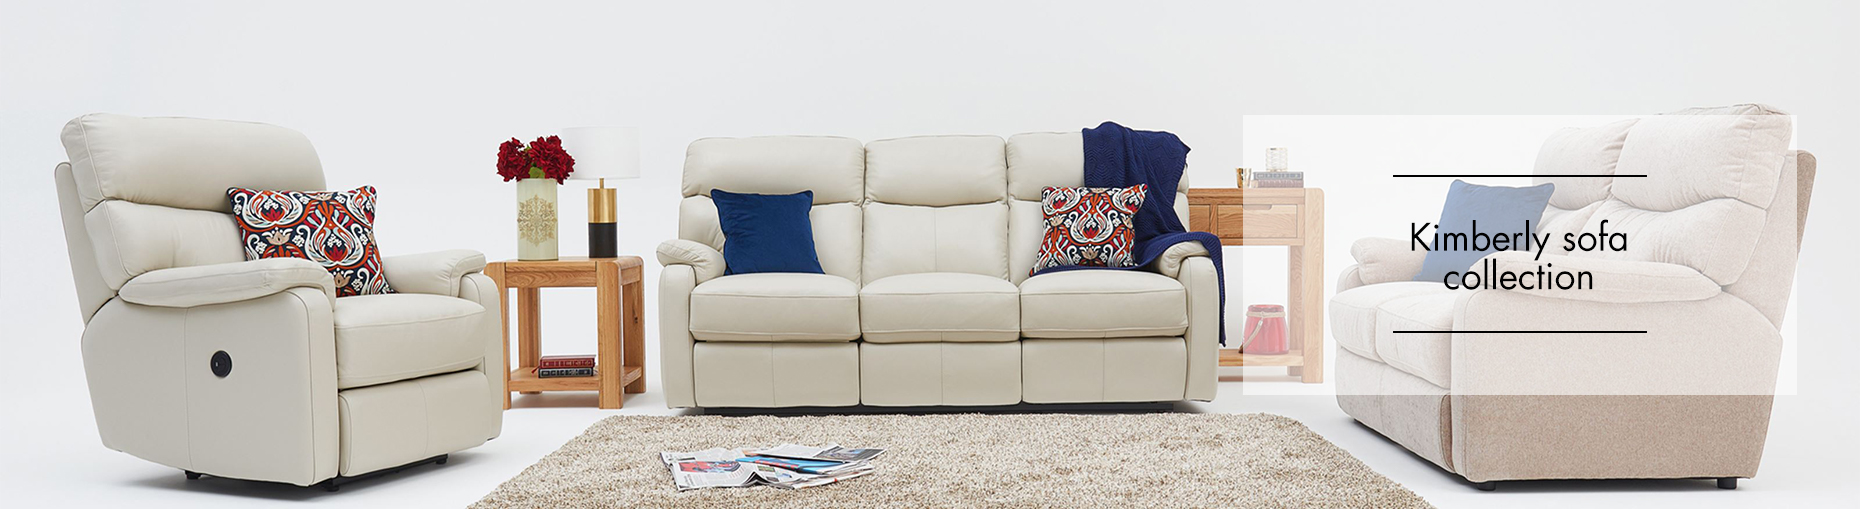 Kimberly Sofa Collection Forrest Furnishing Glasgow S Finest